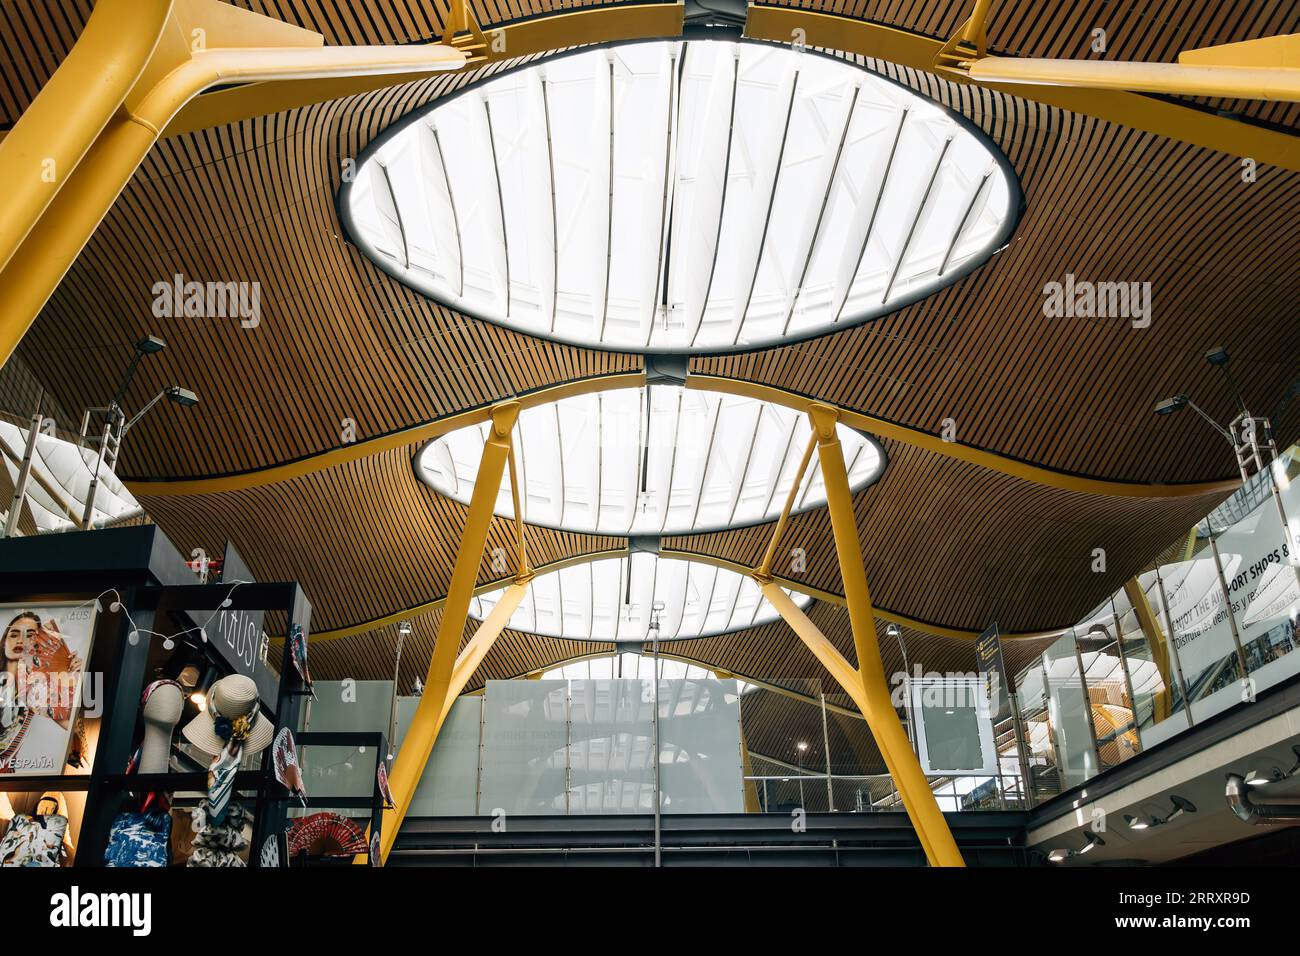 MADRID, SPAIN - August 24, 2023: Architectural detail of ceilings and skylights of Terminal T4 Adolfo Suarez Madrid Barajas Airport. Stock Photo